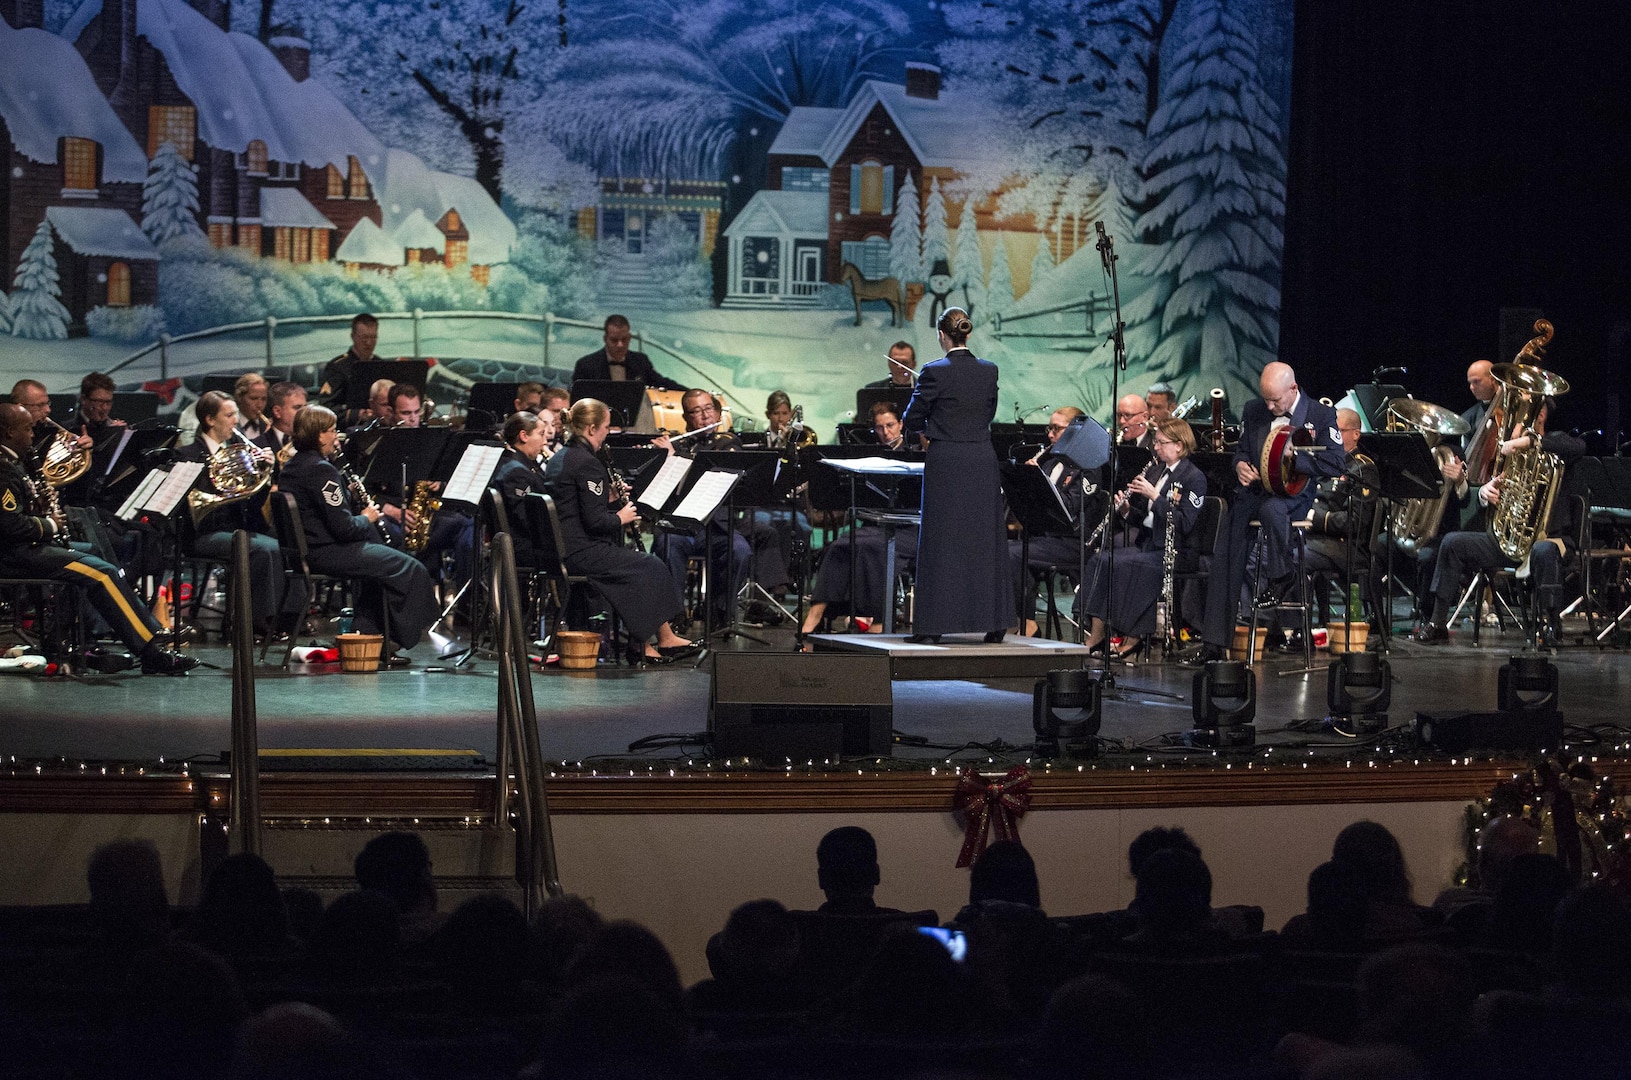 United States Air Force Band of the West performs during the Holiday in Blue concert Dec. 7, 2015 at the Edgewood Independent School District Theatre for the Performing Arts in San Antonio, Texas. The concert included a variety of holiday songs from around the world, a children’s story and a sing-a-long. Attendees included members of JBSA, community members and retirees. The Airmen assigned to the band are highly-trained professional musicians who have dedicated themselves to serving their country through music. (U.S. Air Force photo by Johnny Saldivar)